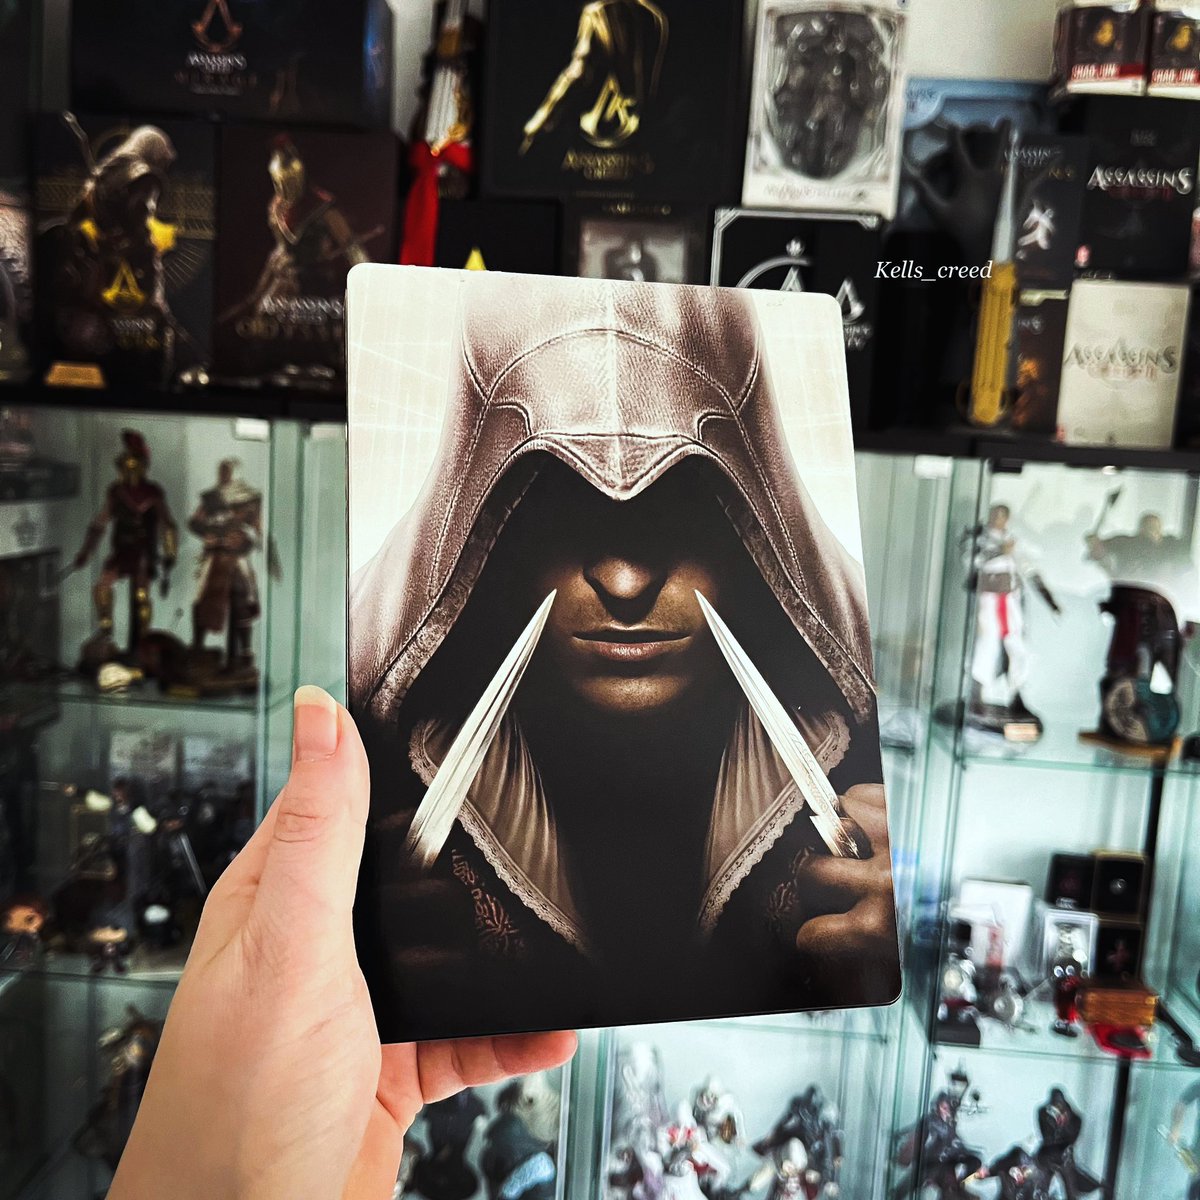 Goodmorning Assassins🖤 It’s Ezio’s steelbook for today’s post💪🏼 Must be one of my favourites😍 Just looks so pretty🥹🖤 Do you collect steelbooks? 💥 Have a great day Assassins💪🏼 #AssassinsCreed #EzioAuditore